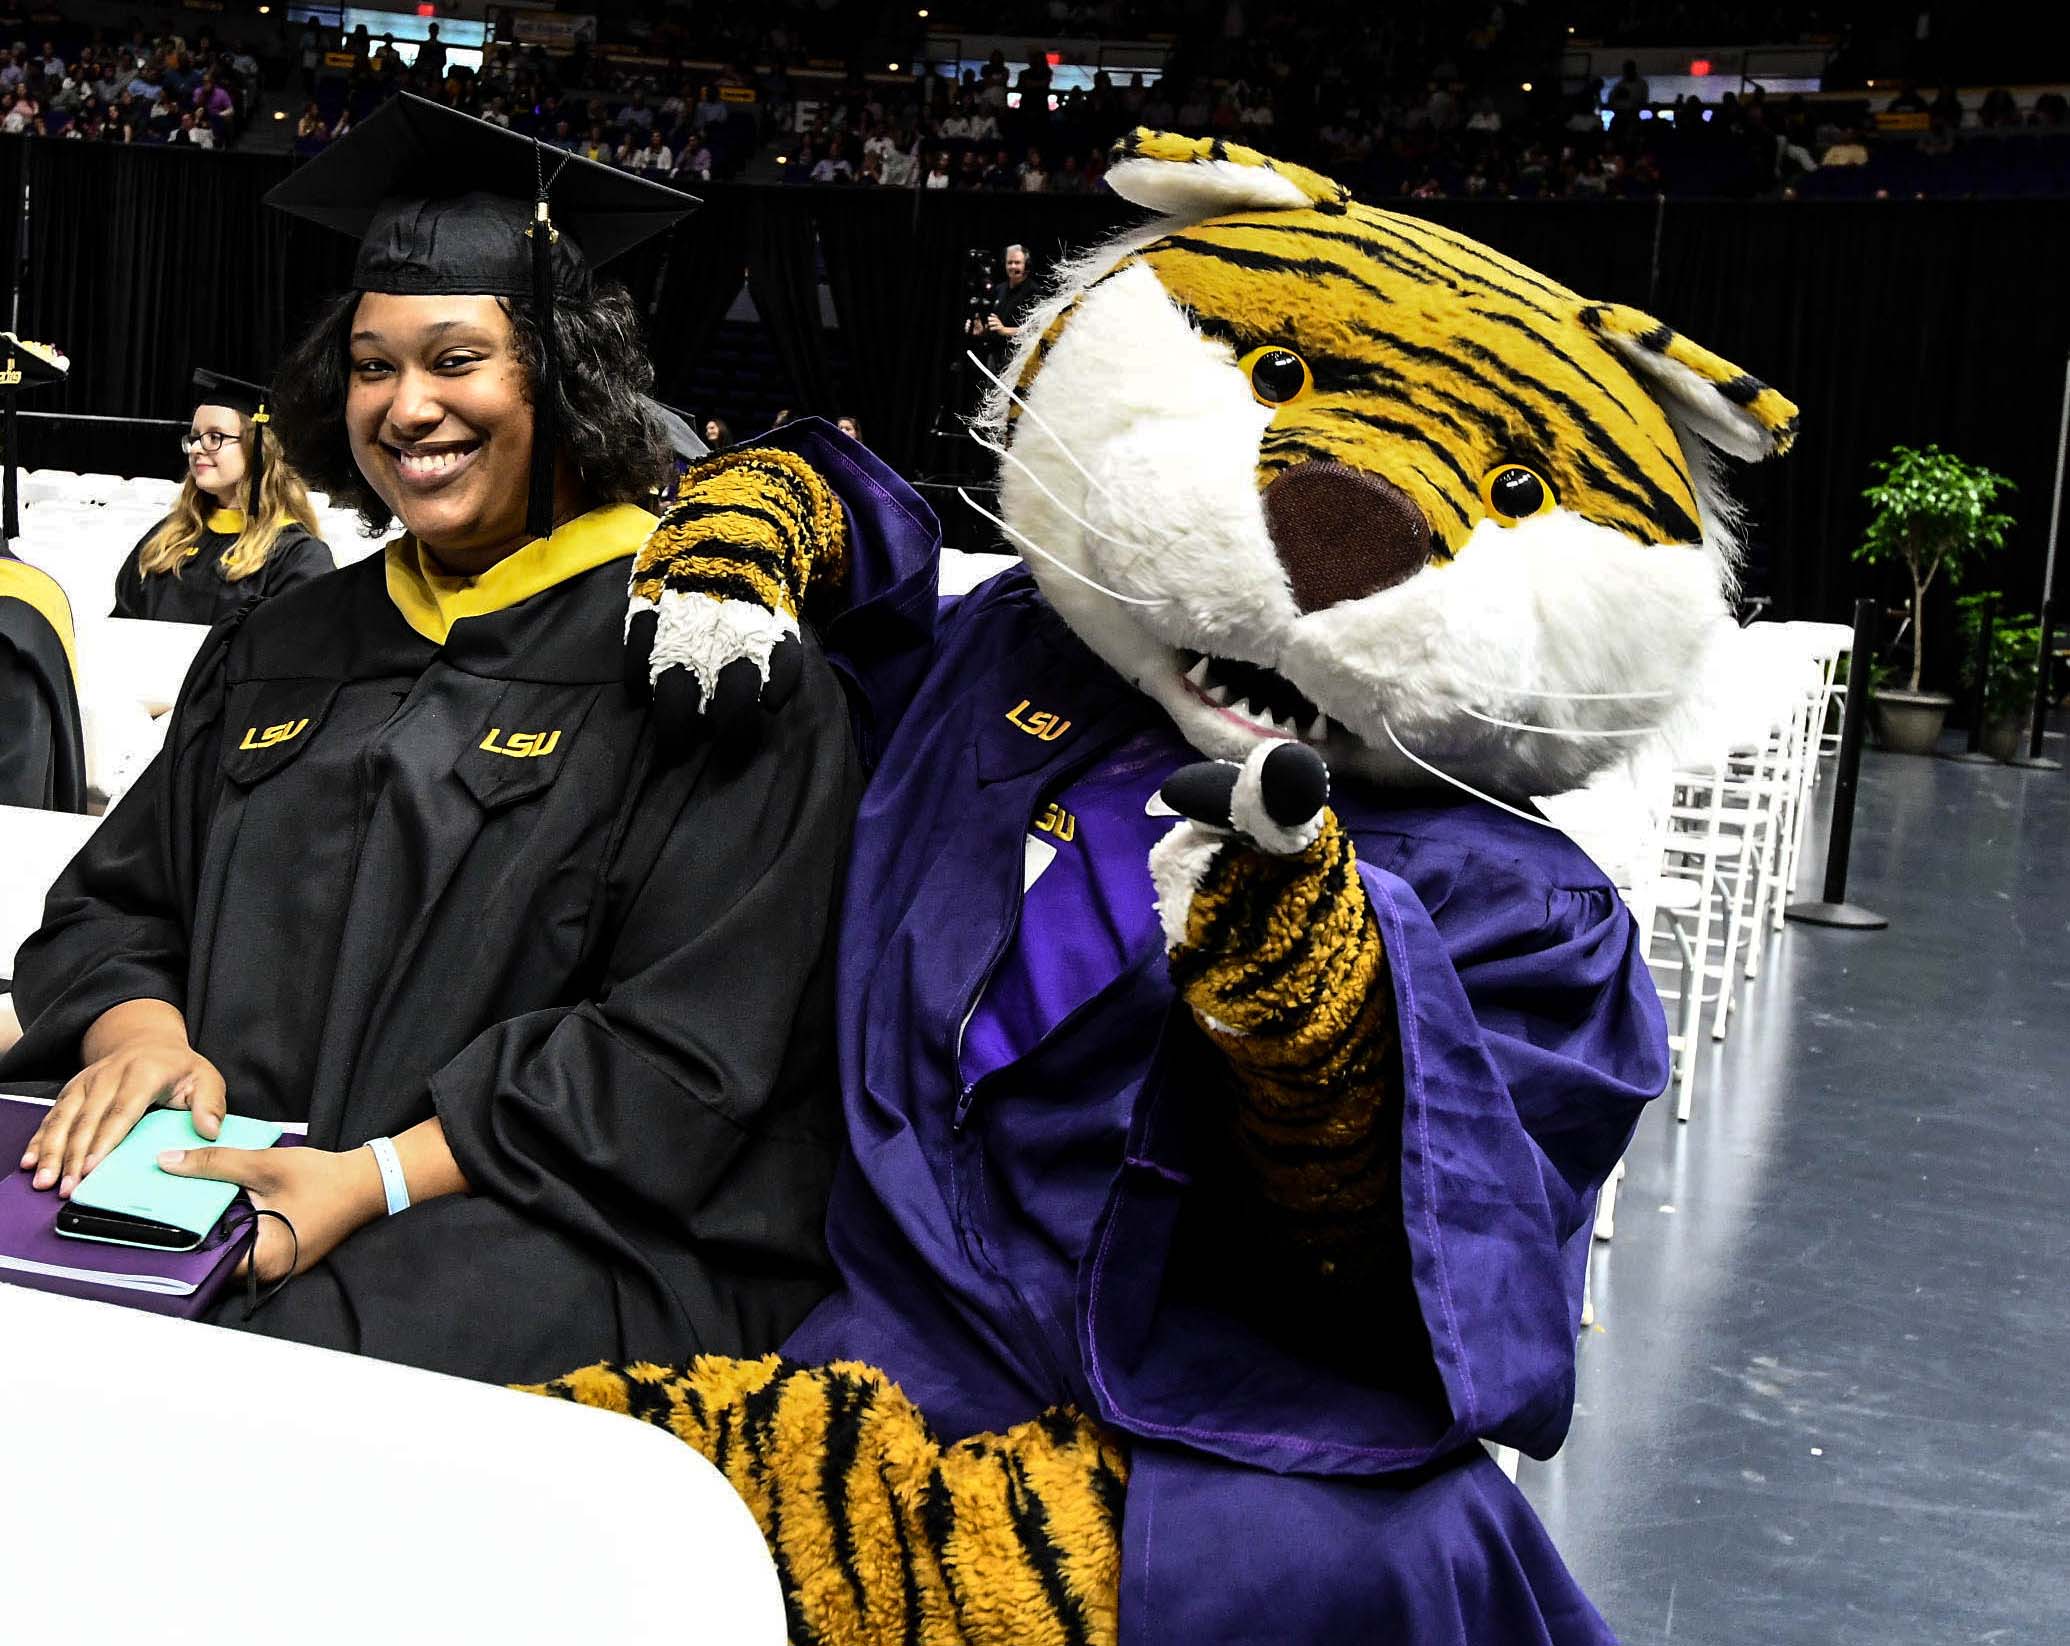 Black female and Mike the Tiger in graduation gowns and caps